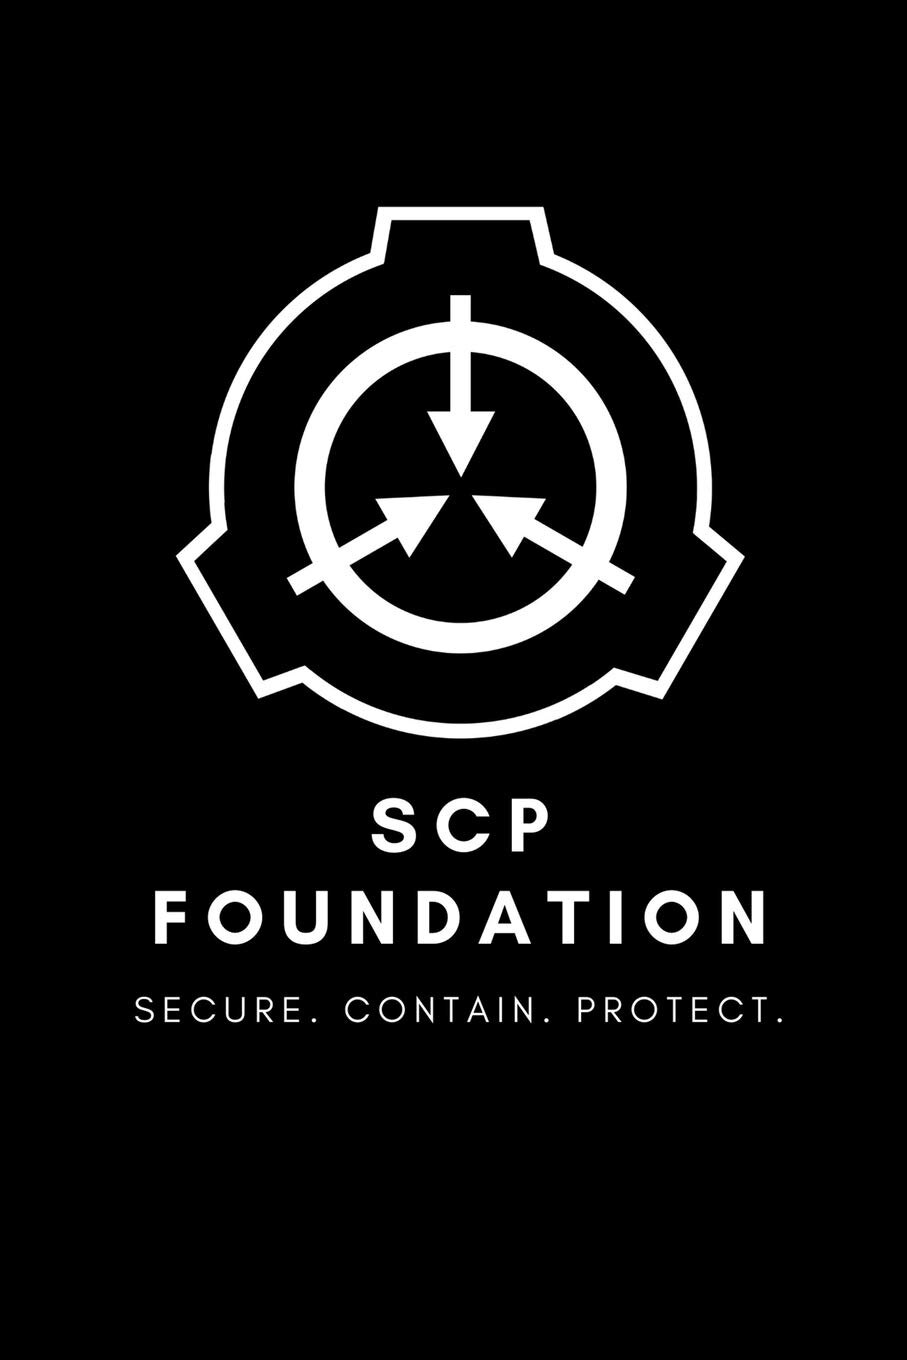 I gathered all existing MTF logos and put them here. cr: scp wiki